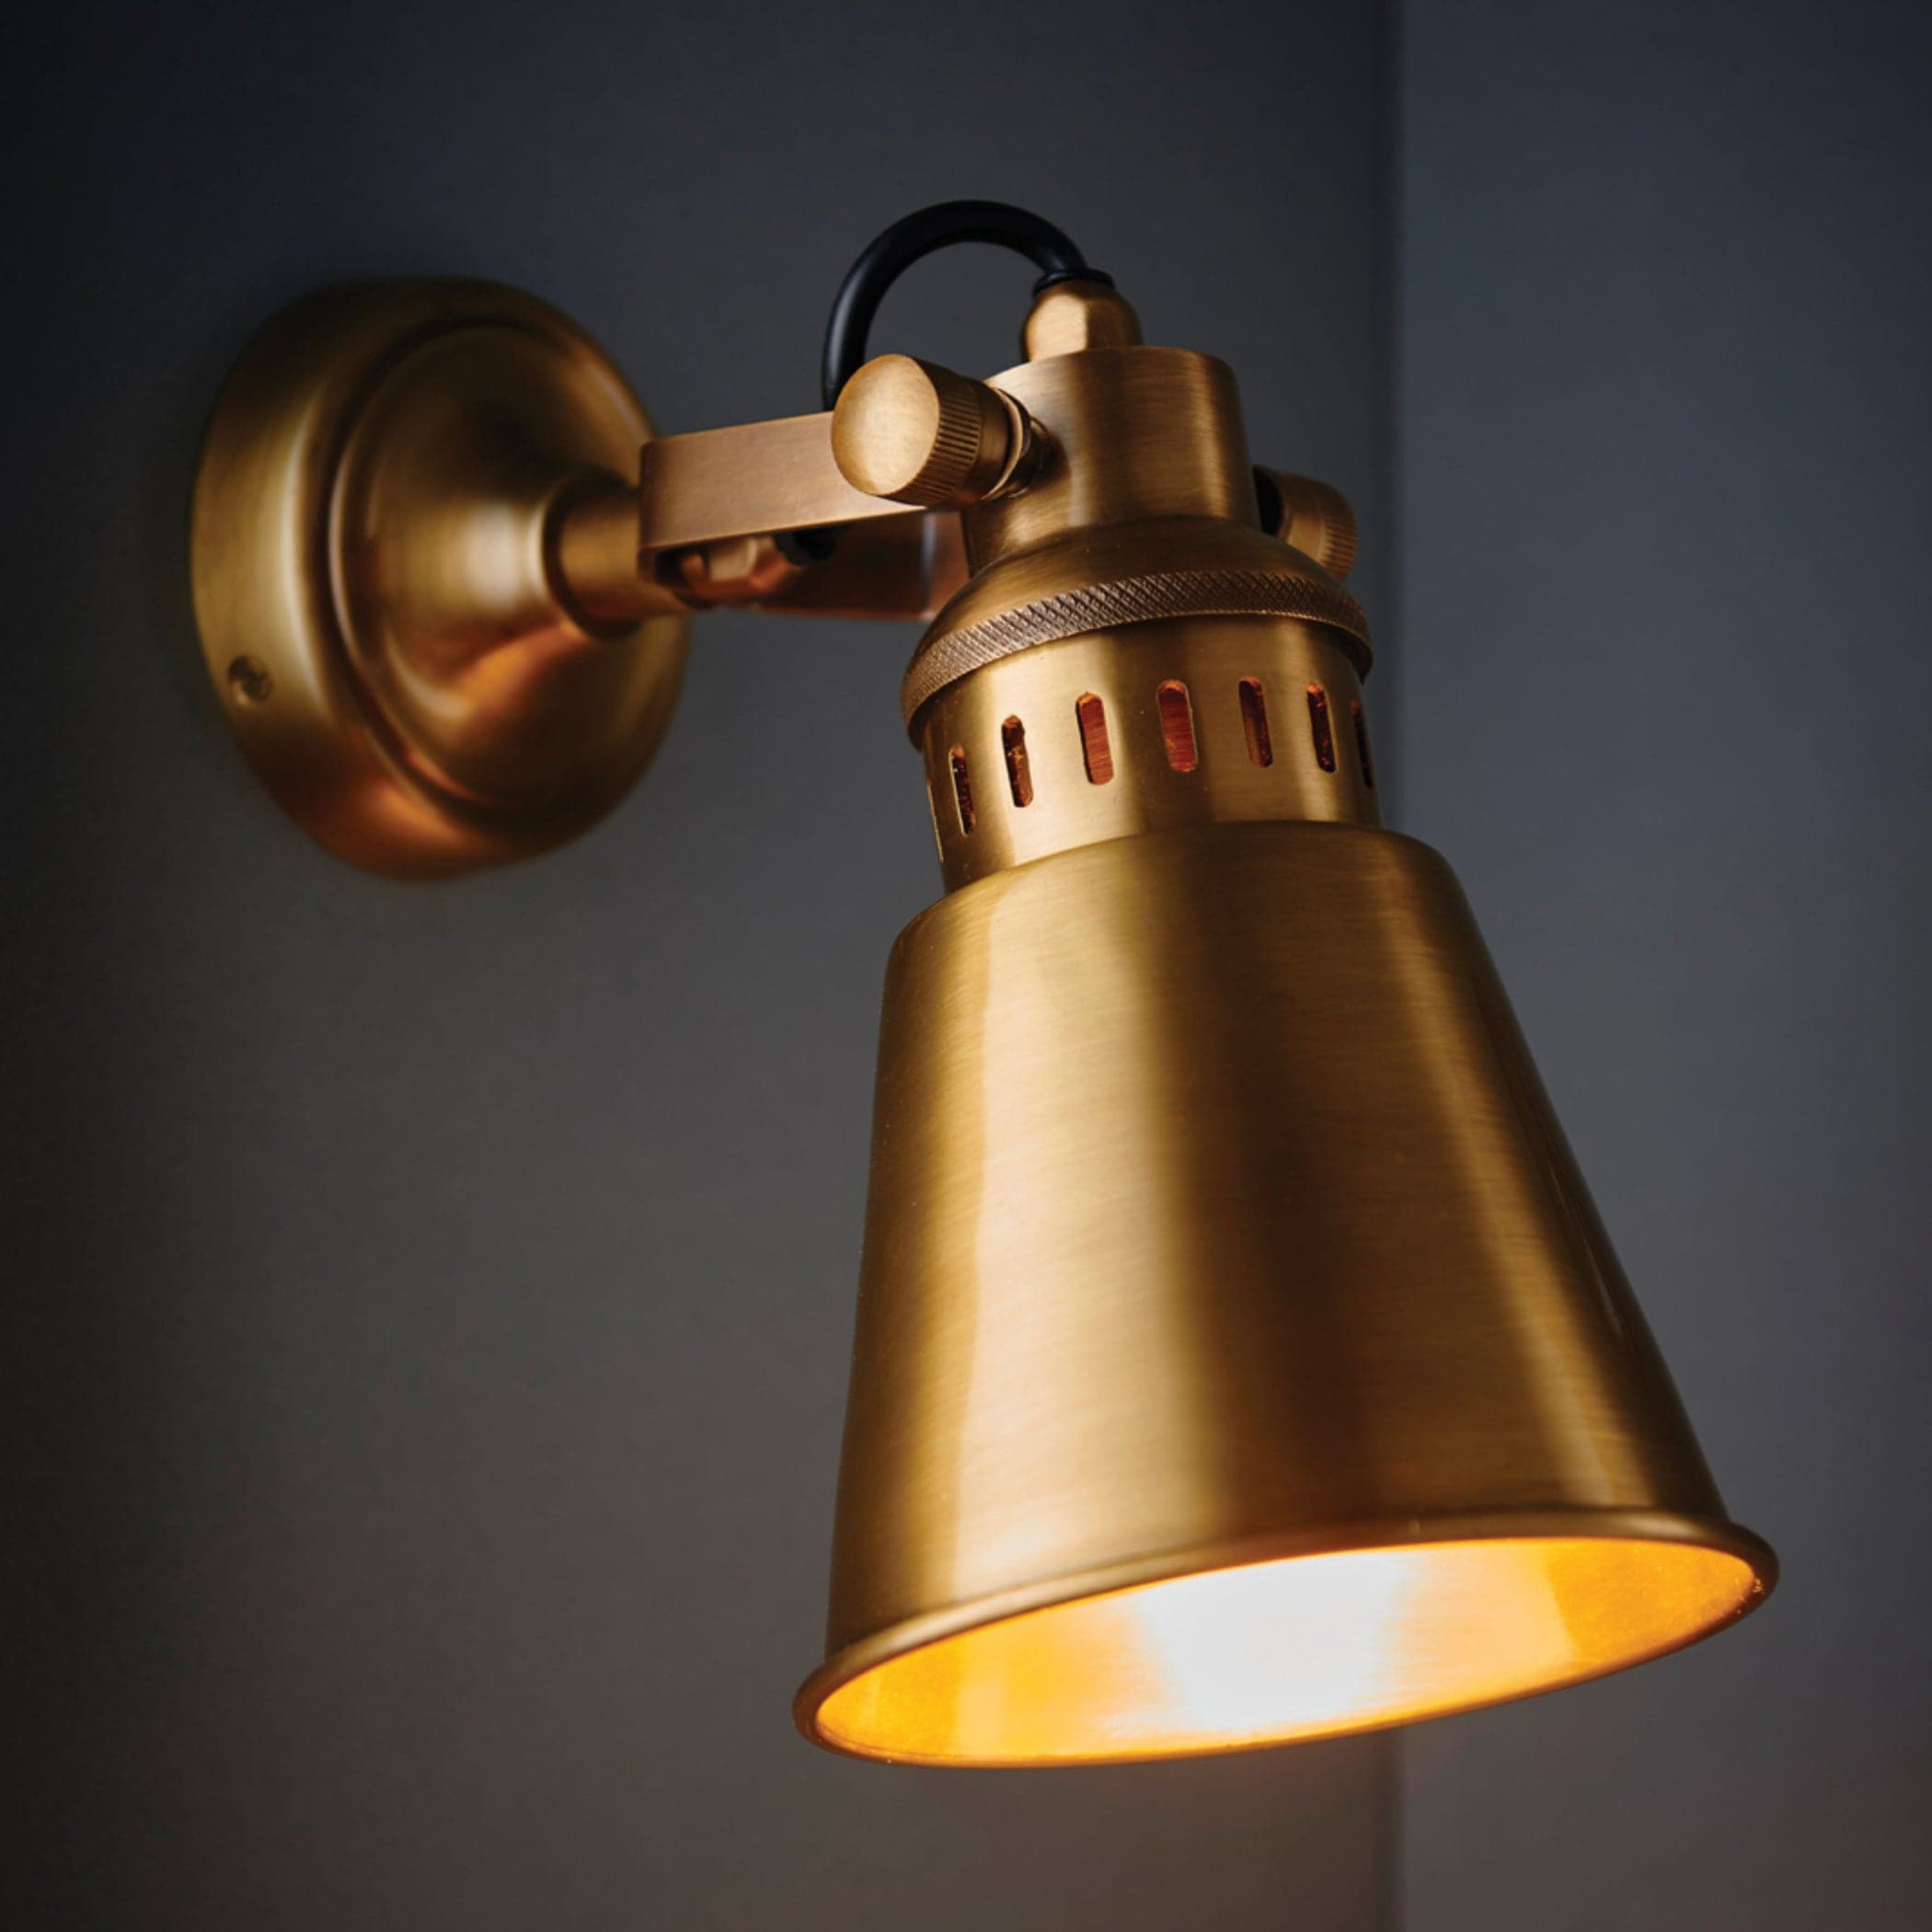 Antiqued Brass vintage style Wall Light